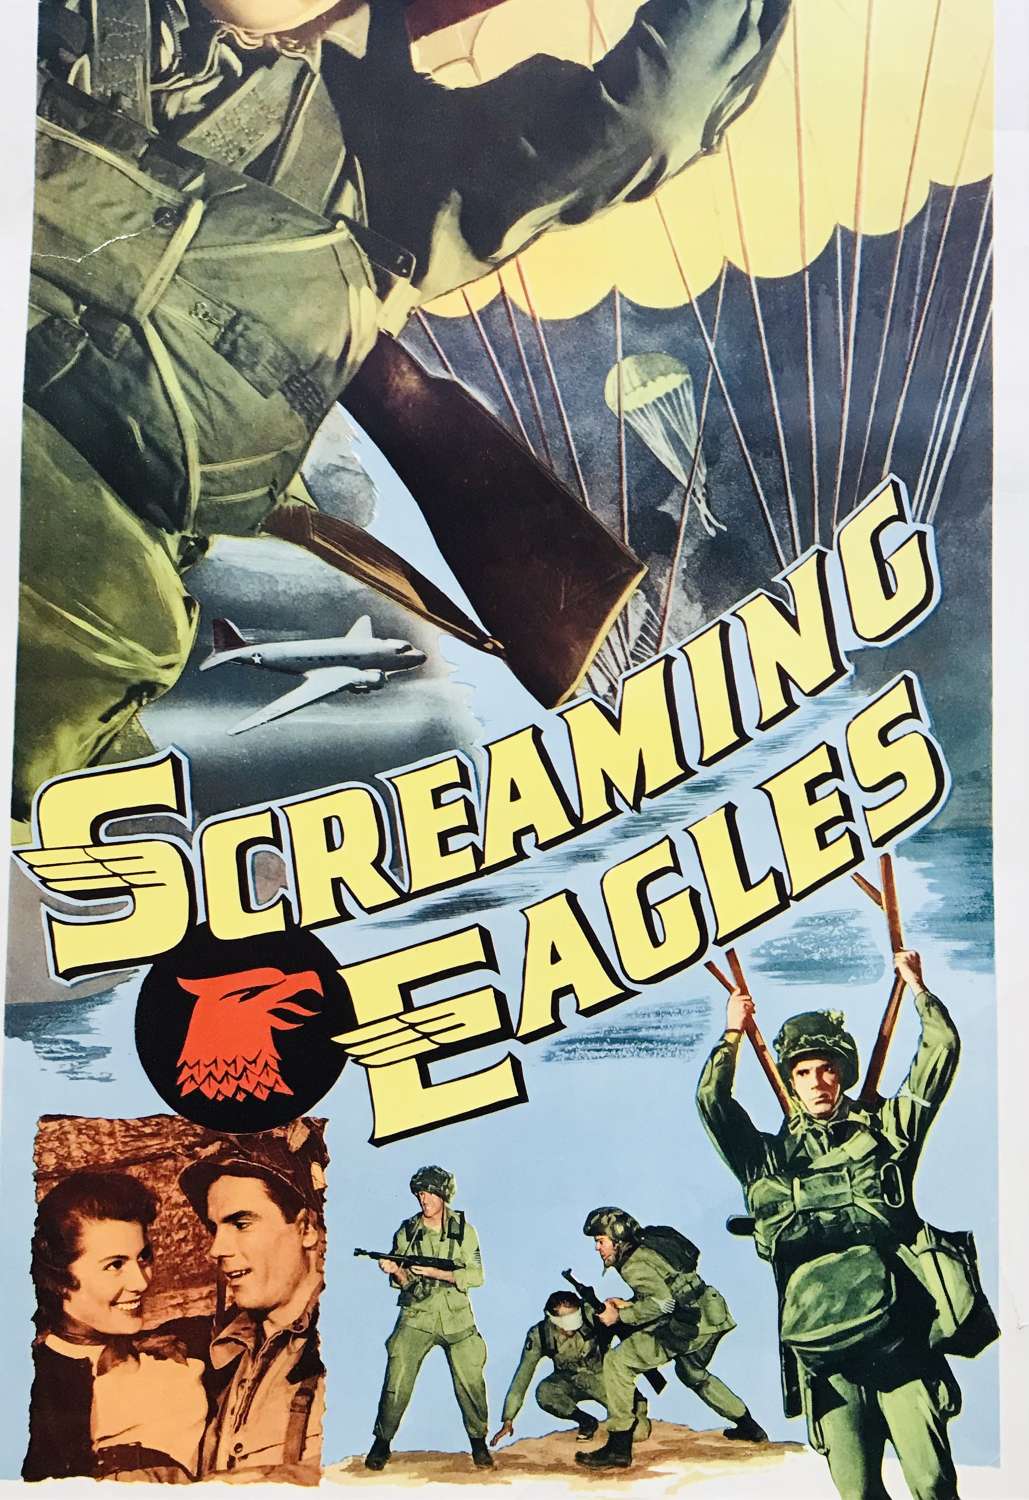 Screaming Eagle film poster 1956